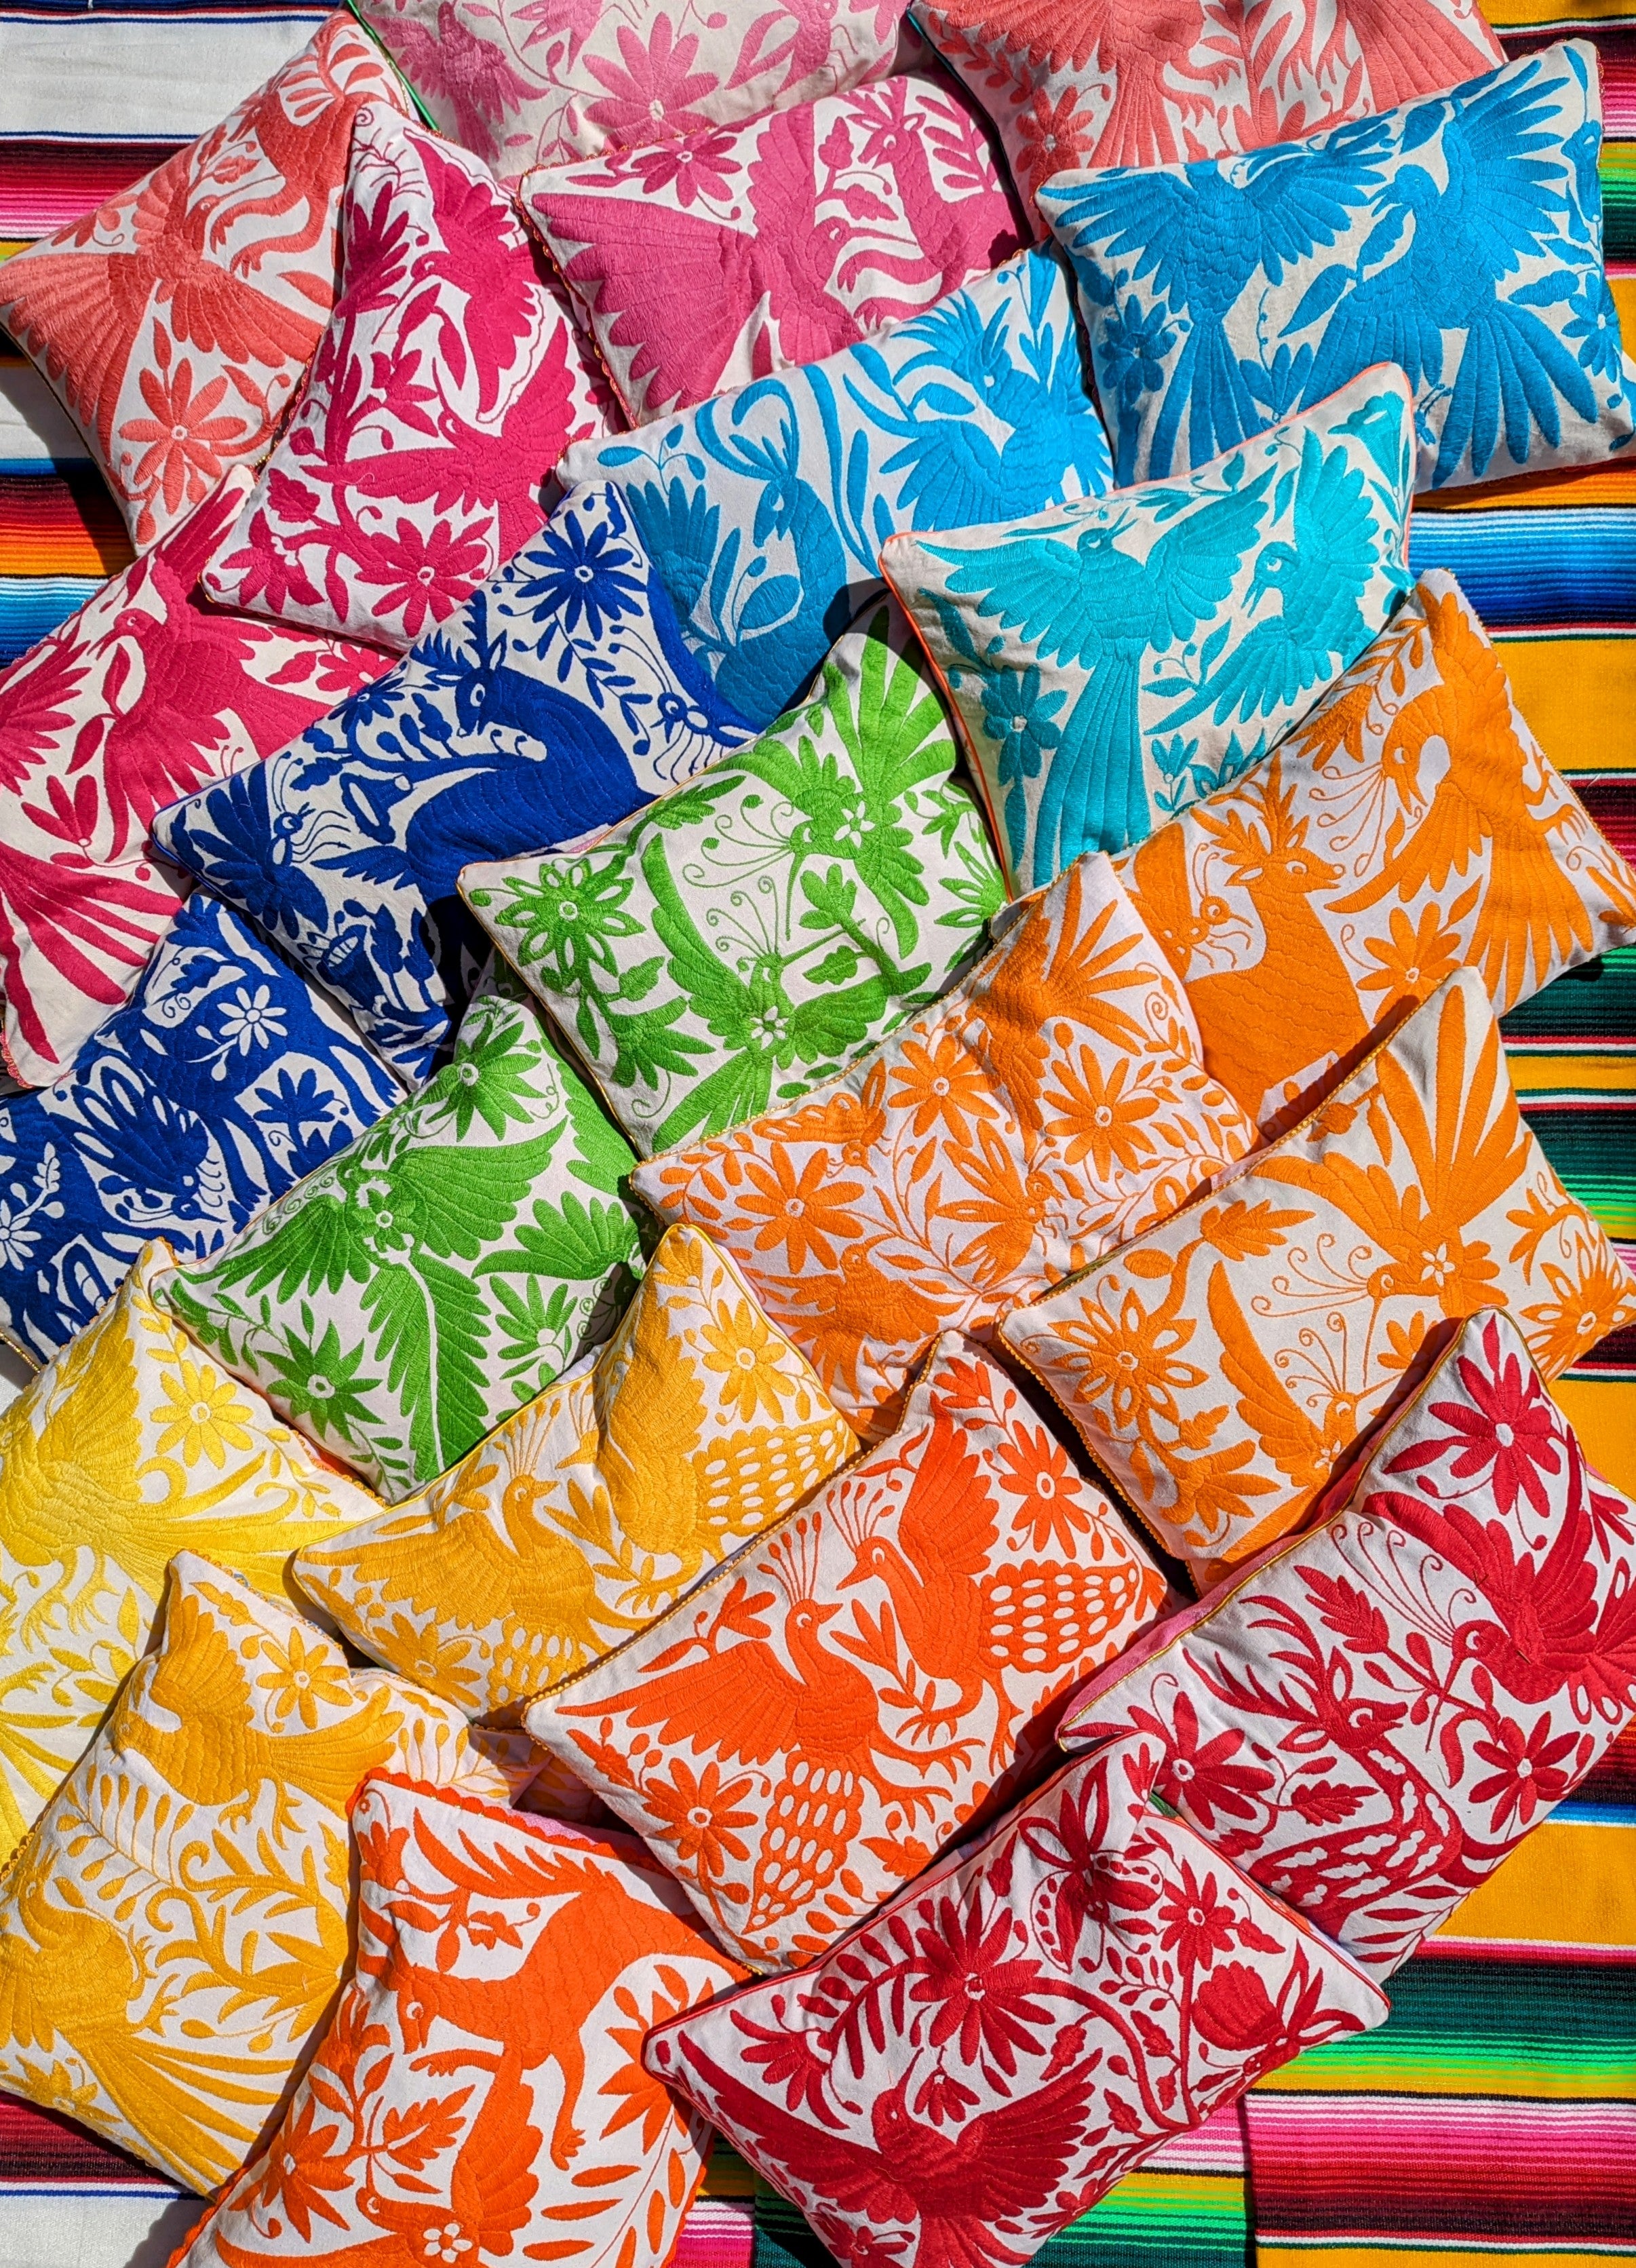 Mexican Otomi embroidered cushions